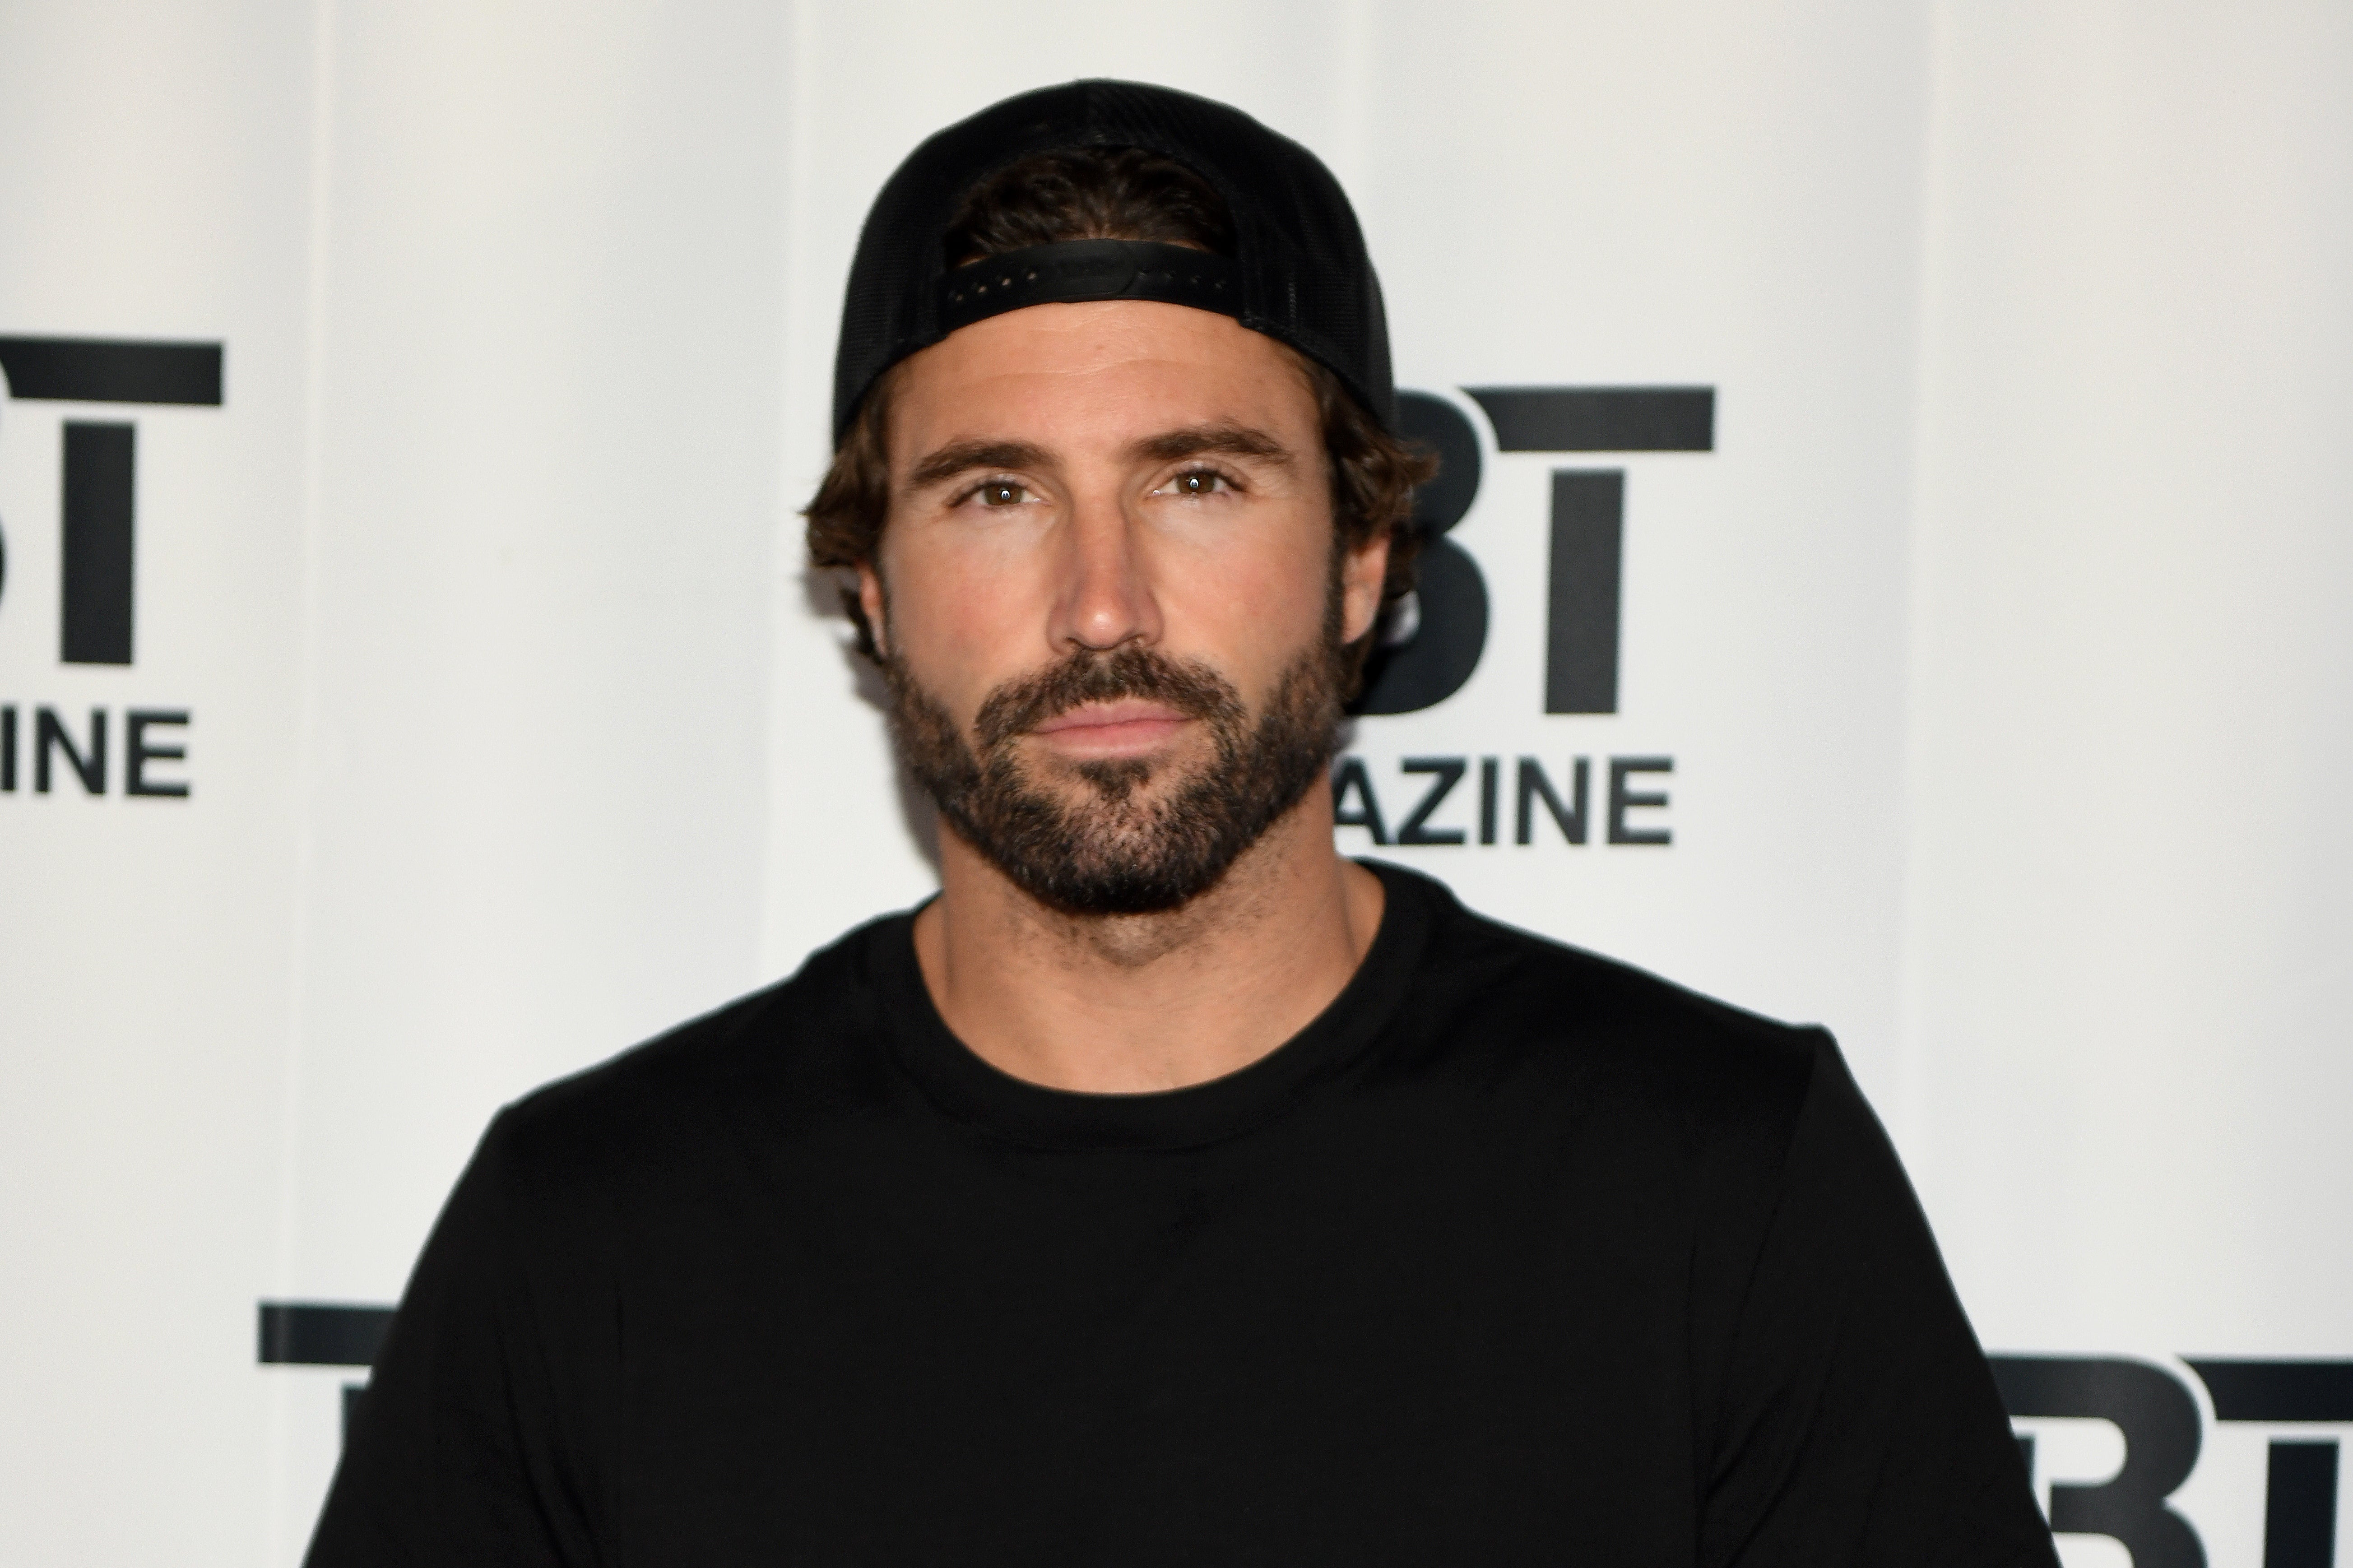 Brody Jenner attend the TBT Magazine Charleston launch party powered by Berman Law Group on April 28, 2022